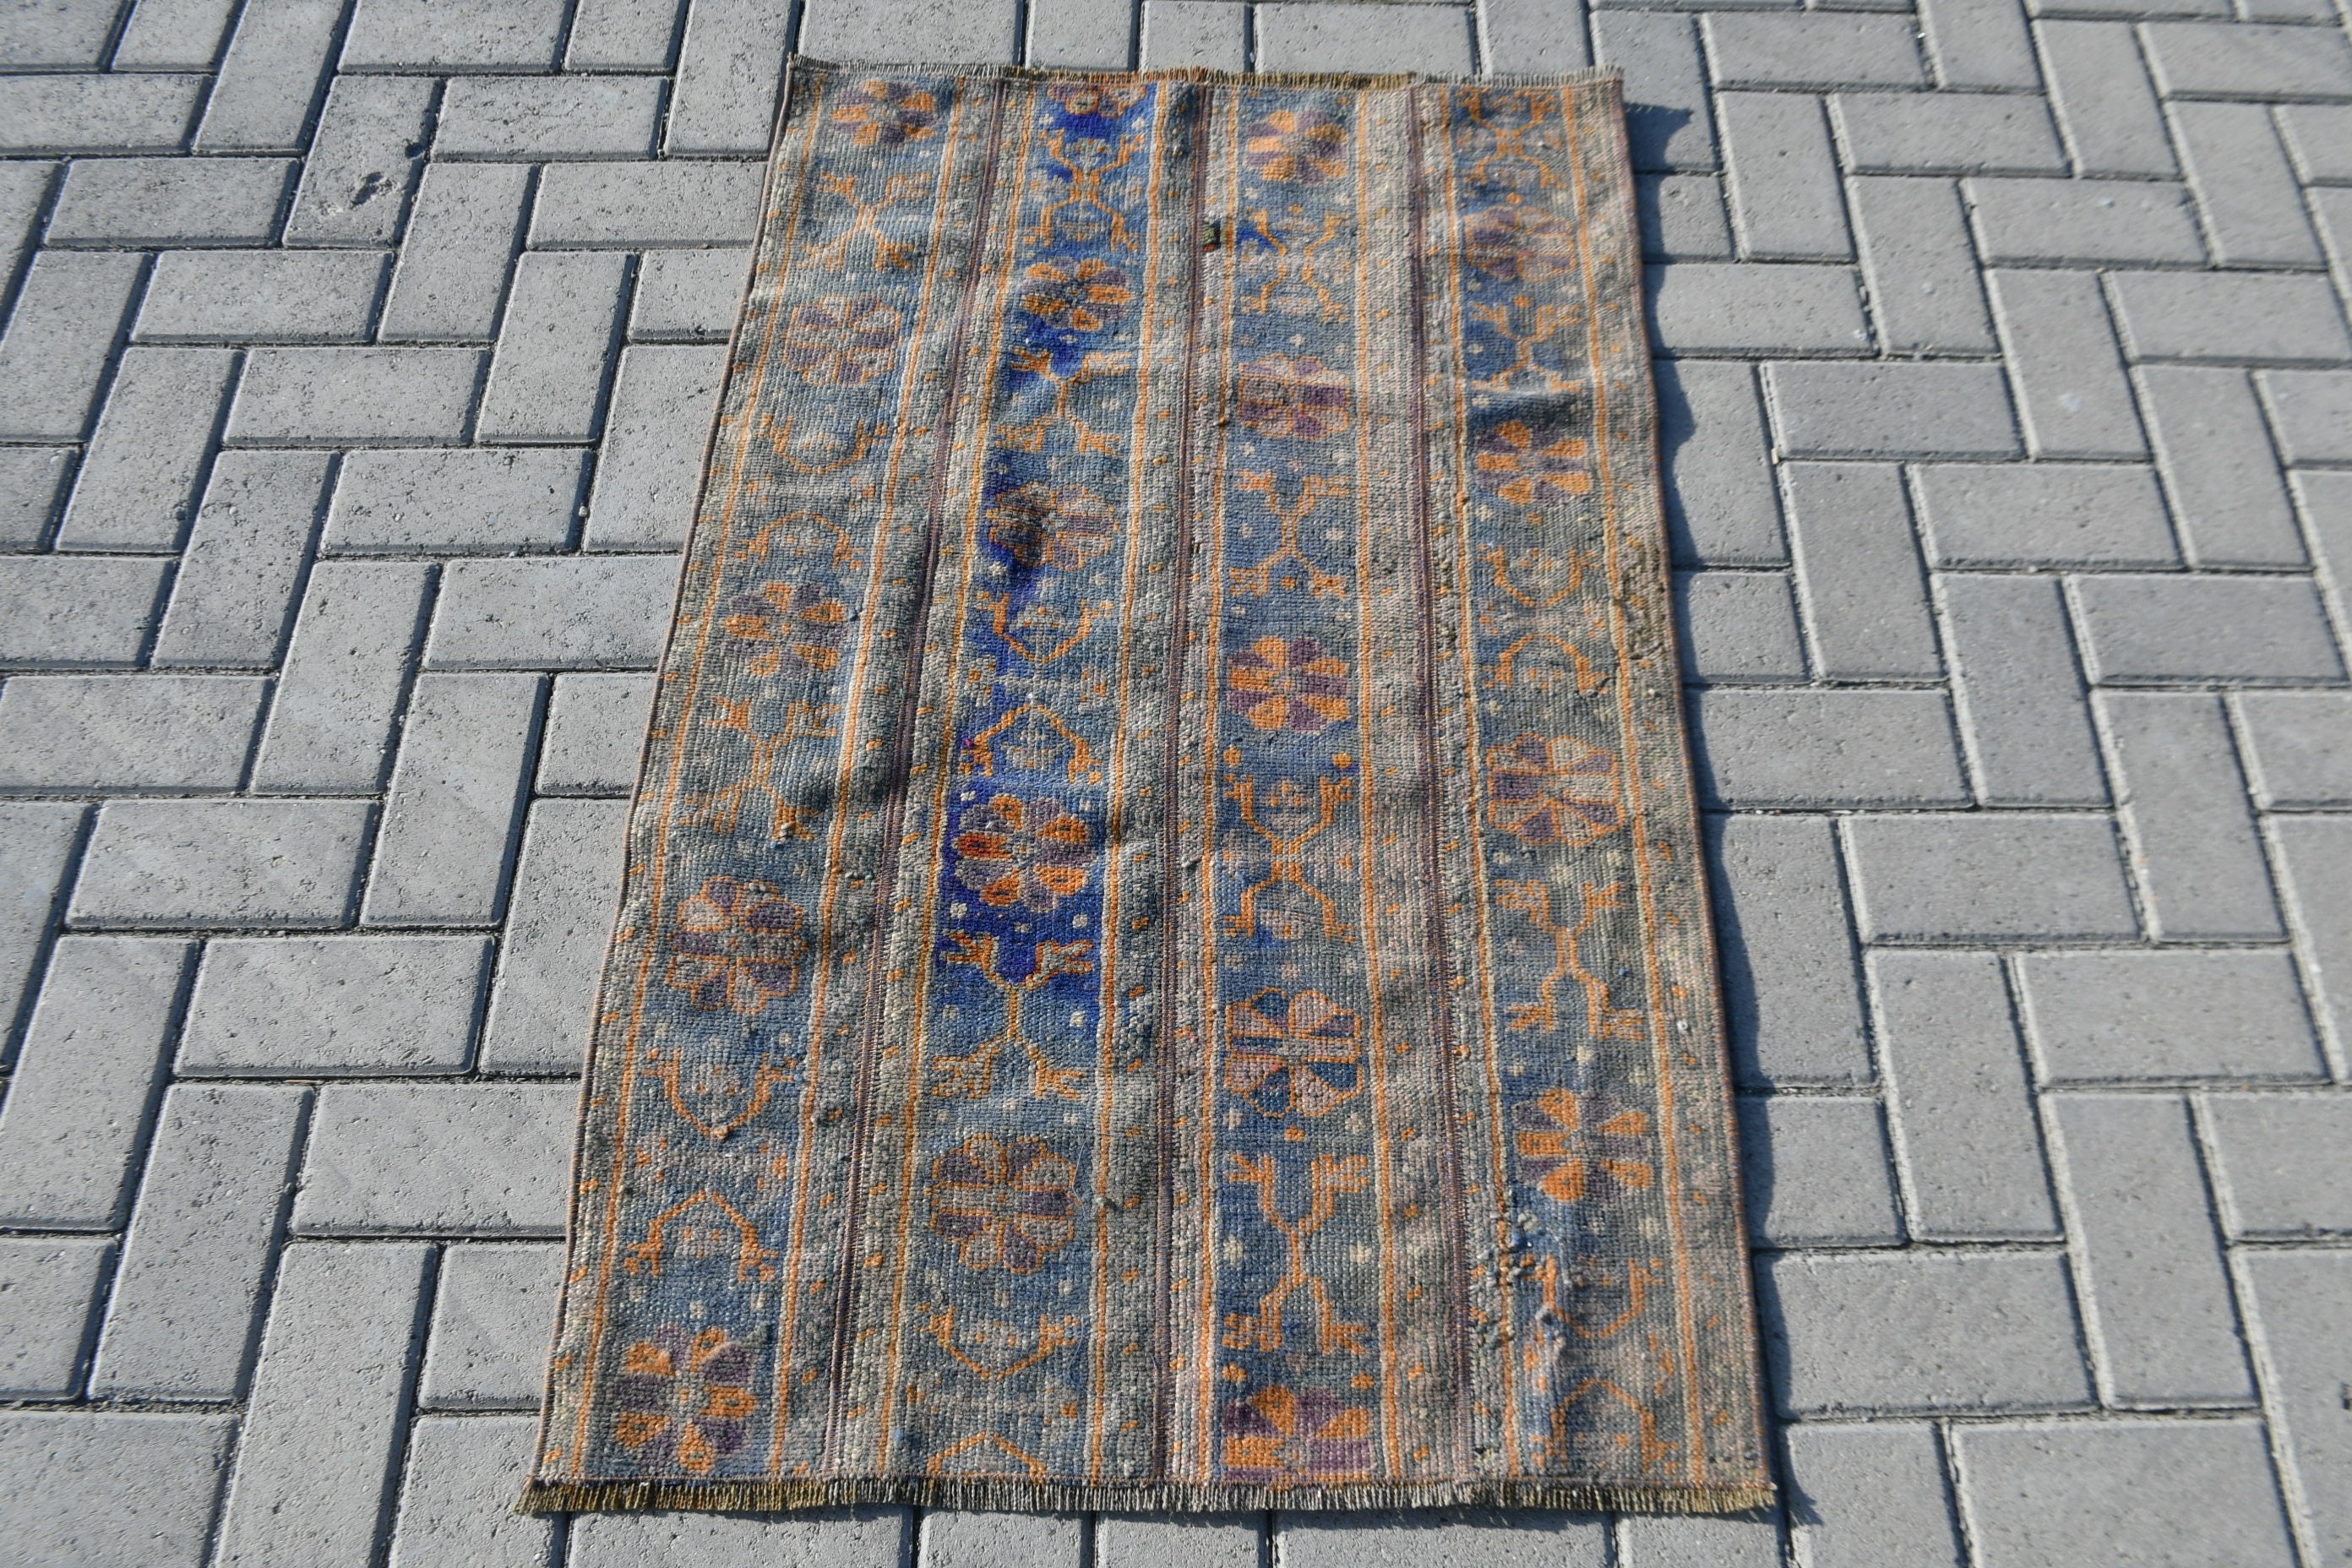 Wool Rug, Rugs for Car Mat, Blue Home Decor Rugs, Bath Rugs, Vintage Rugs, Turkish Rugs, Oriental Rugs, Car Mat Rugs, 2.4x3.7 ft Small Rug